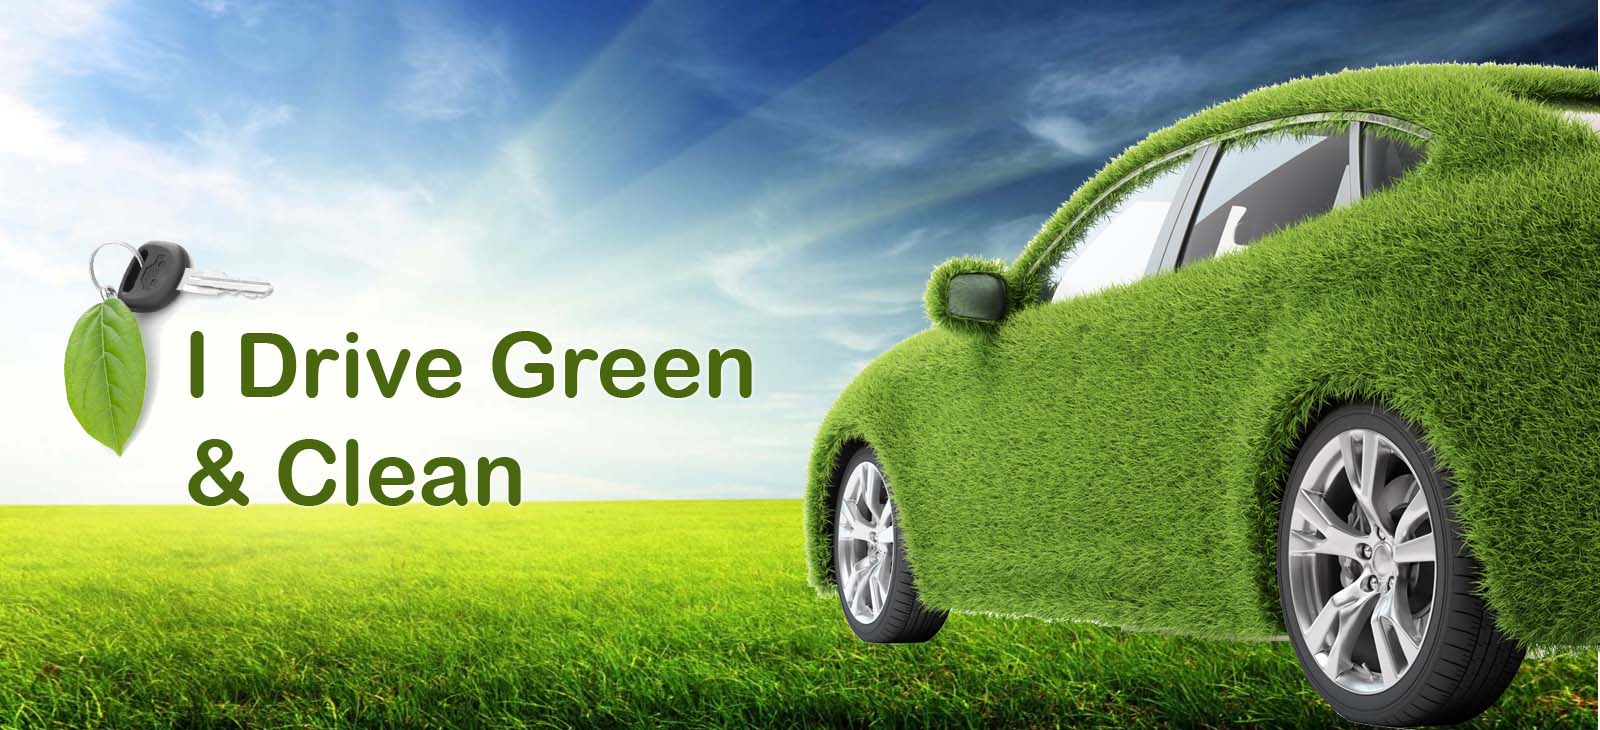 SWITCH TO CNG & Go Green